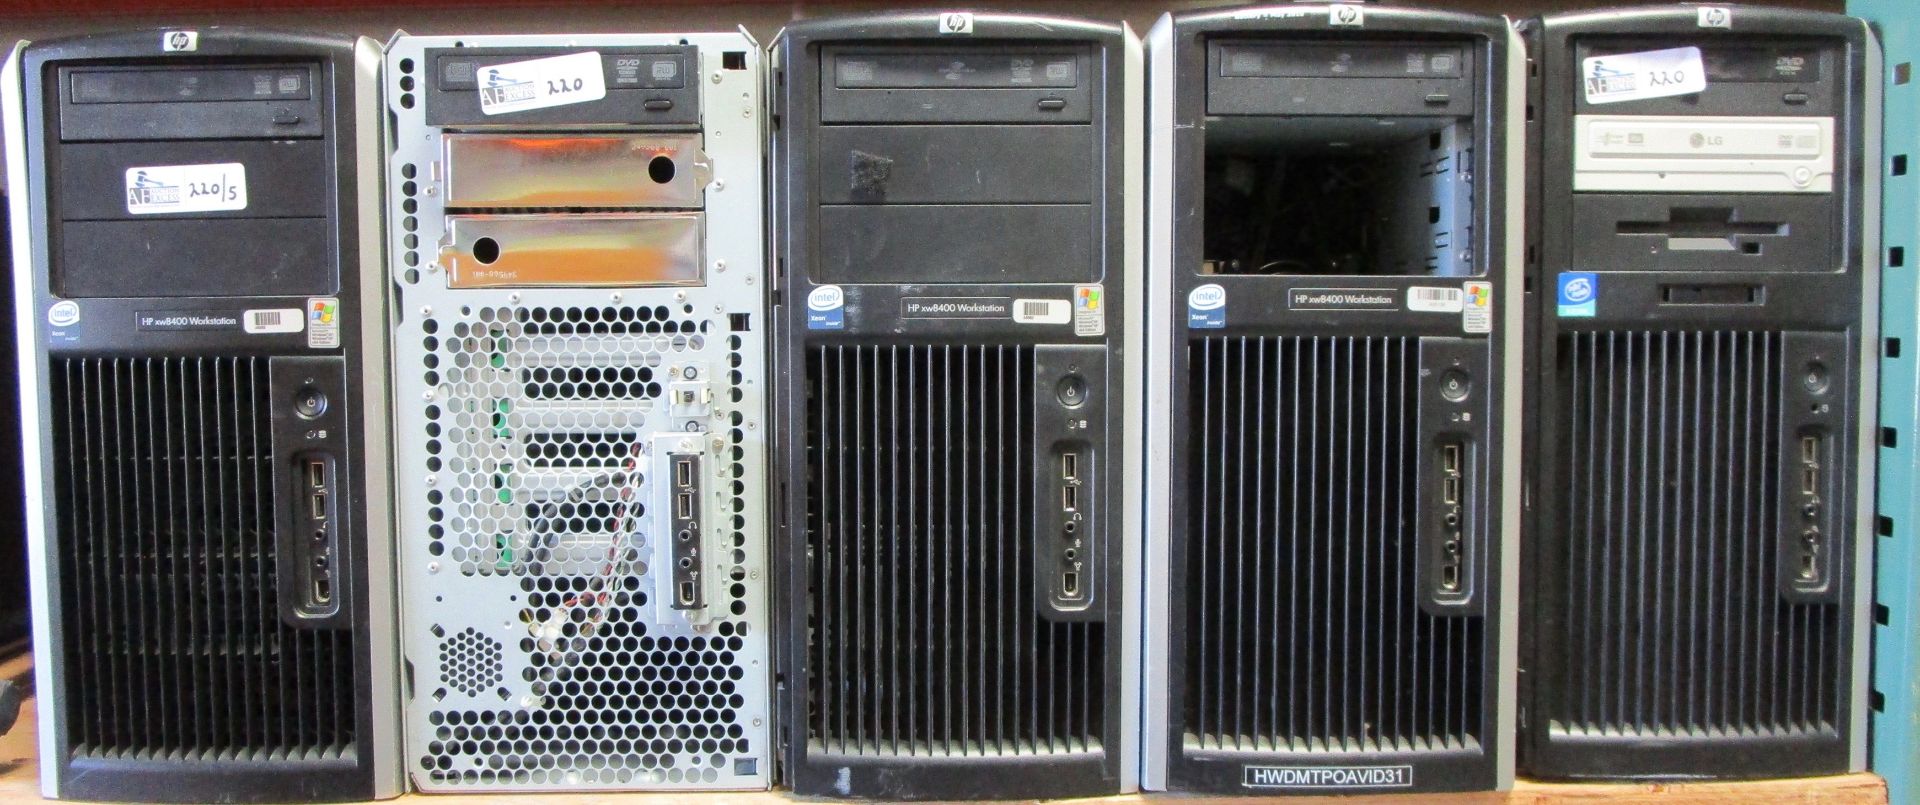 LOT OF 5 HP COMPUTERS